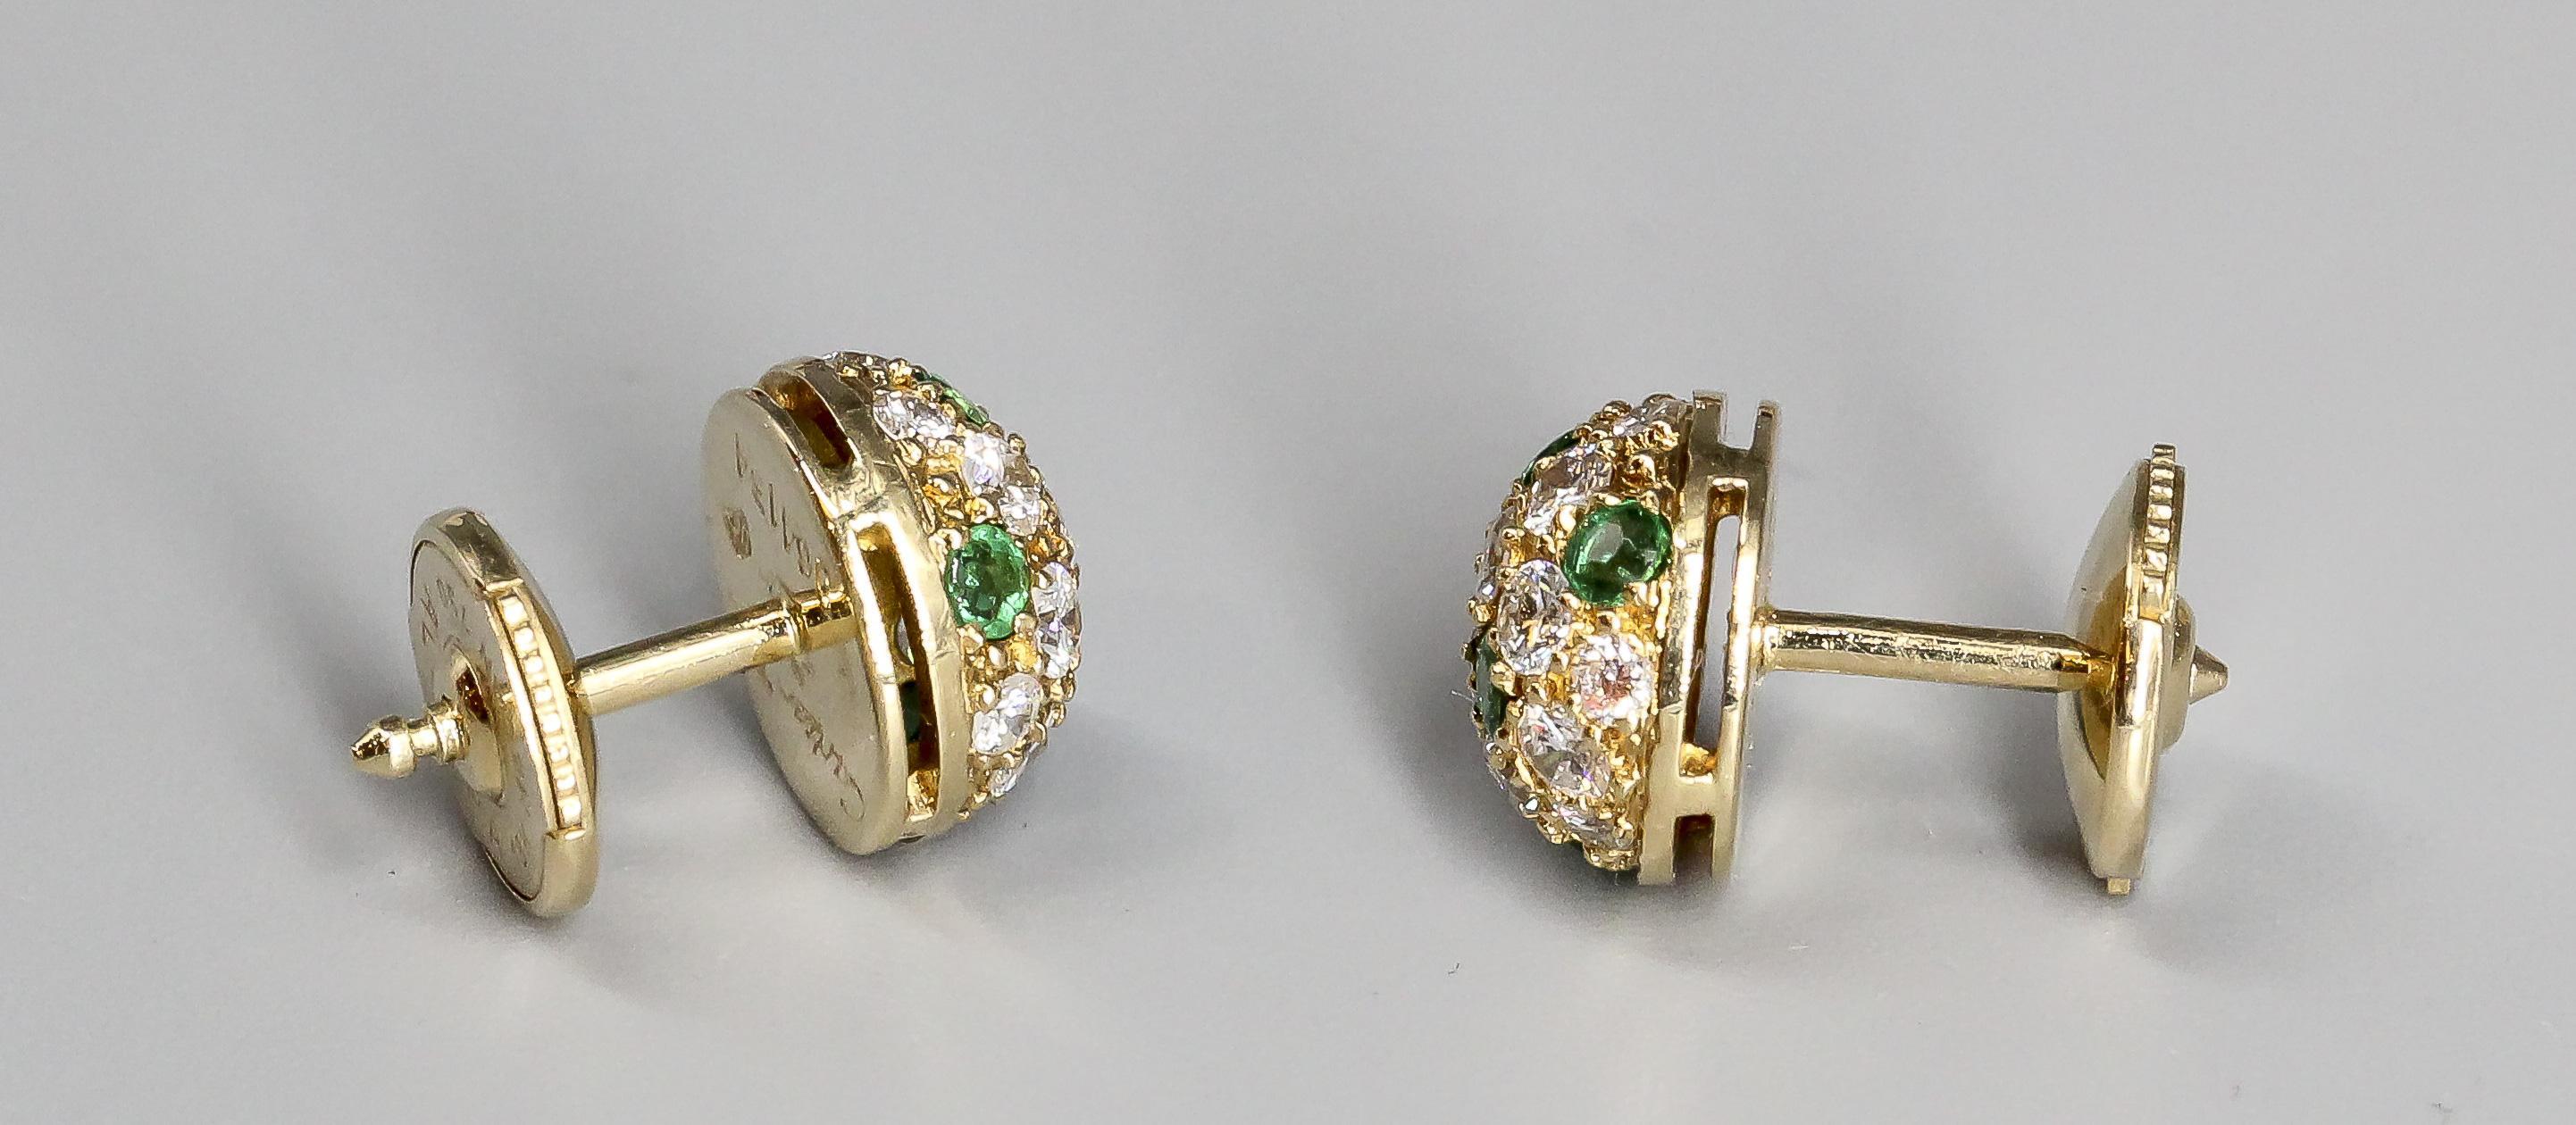 Contemporary Cartier Emerald and  Diamond 18K Gold Petite Dome Earrings